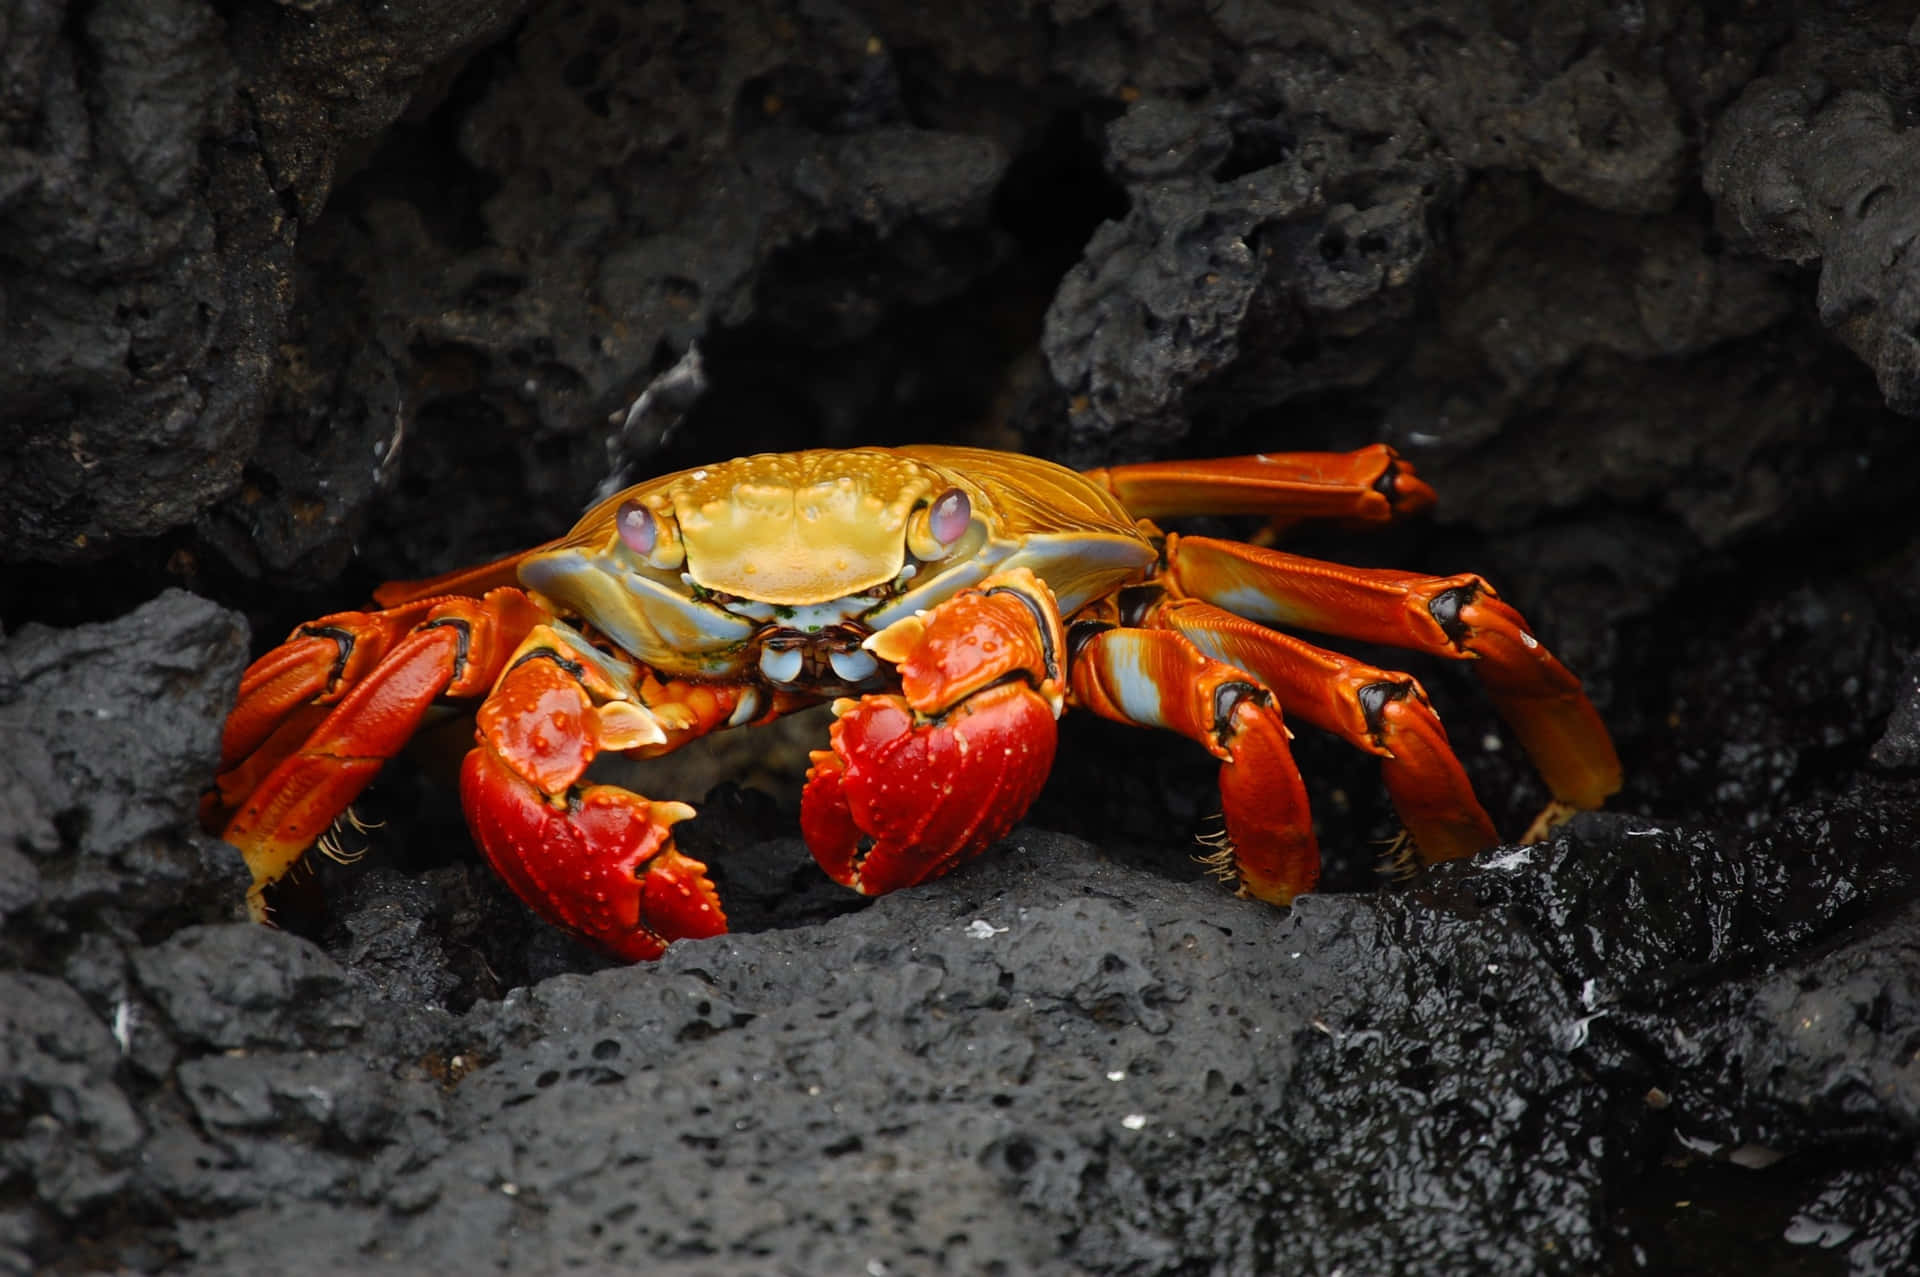 A vibrant, tropical Crab basks in the sun.